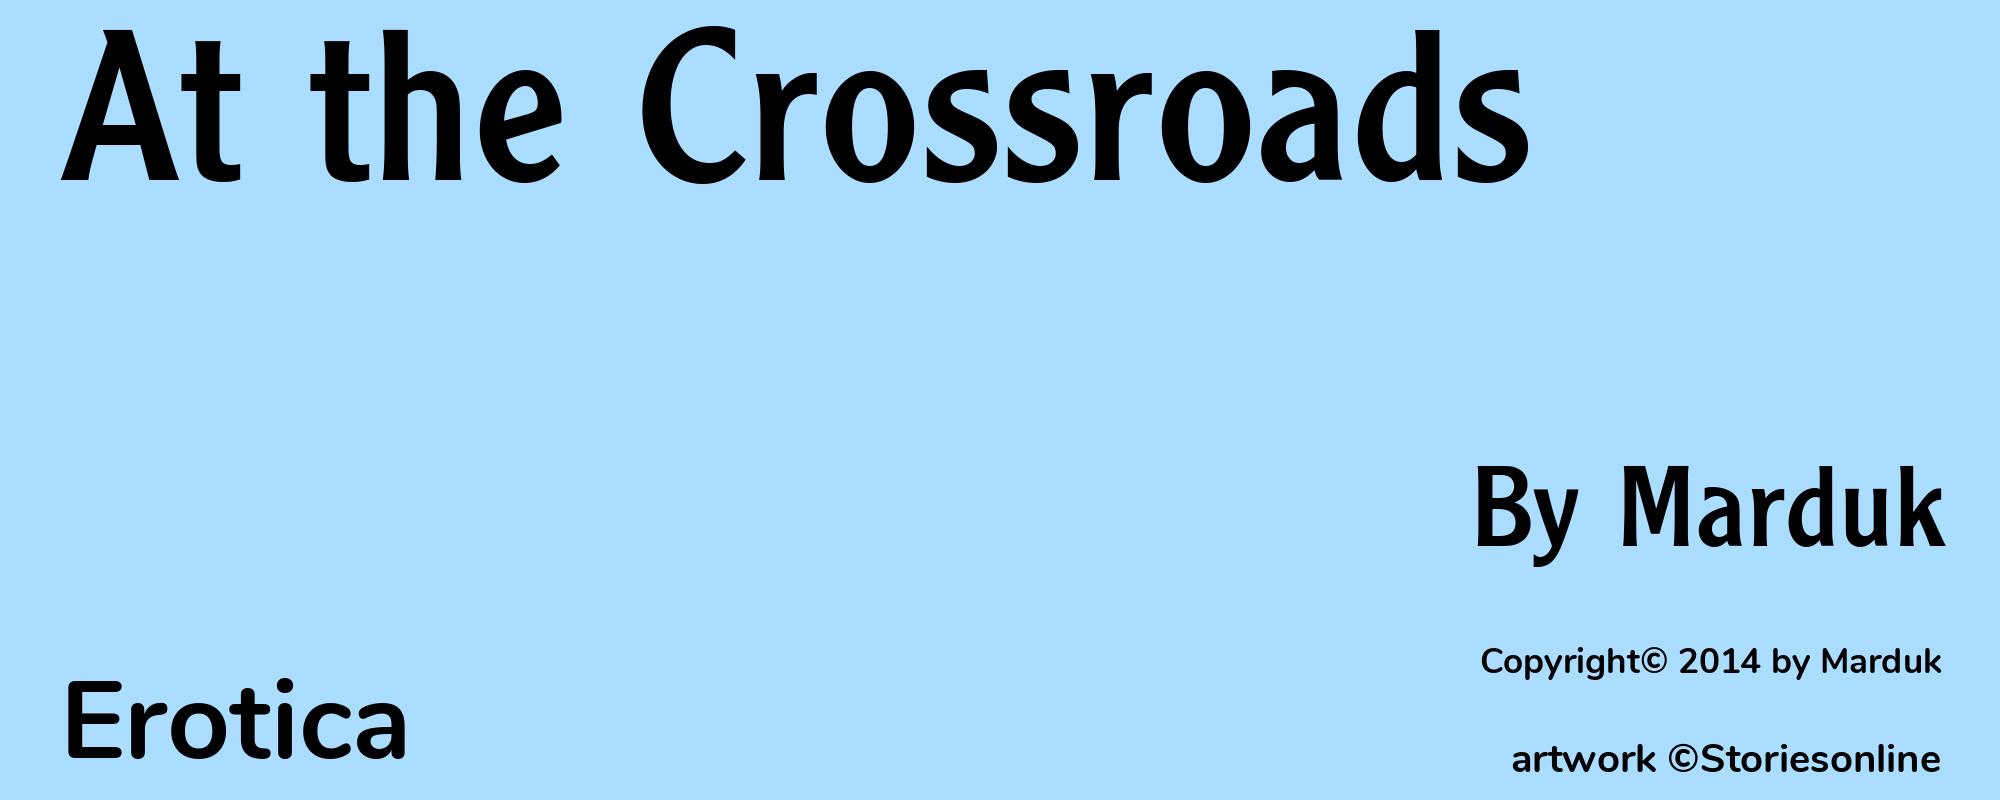 At the Crossroads - Cover